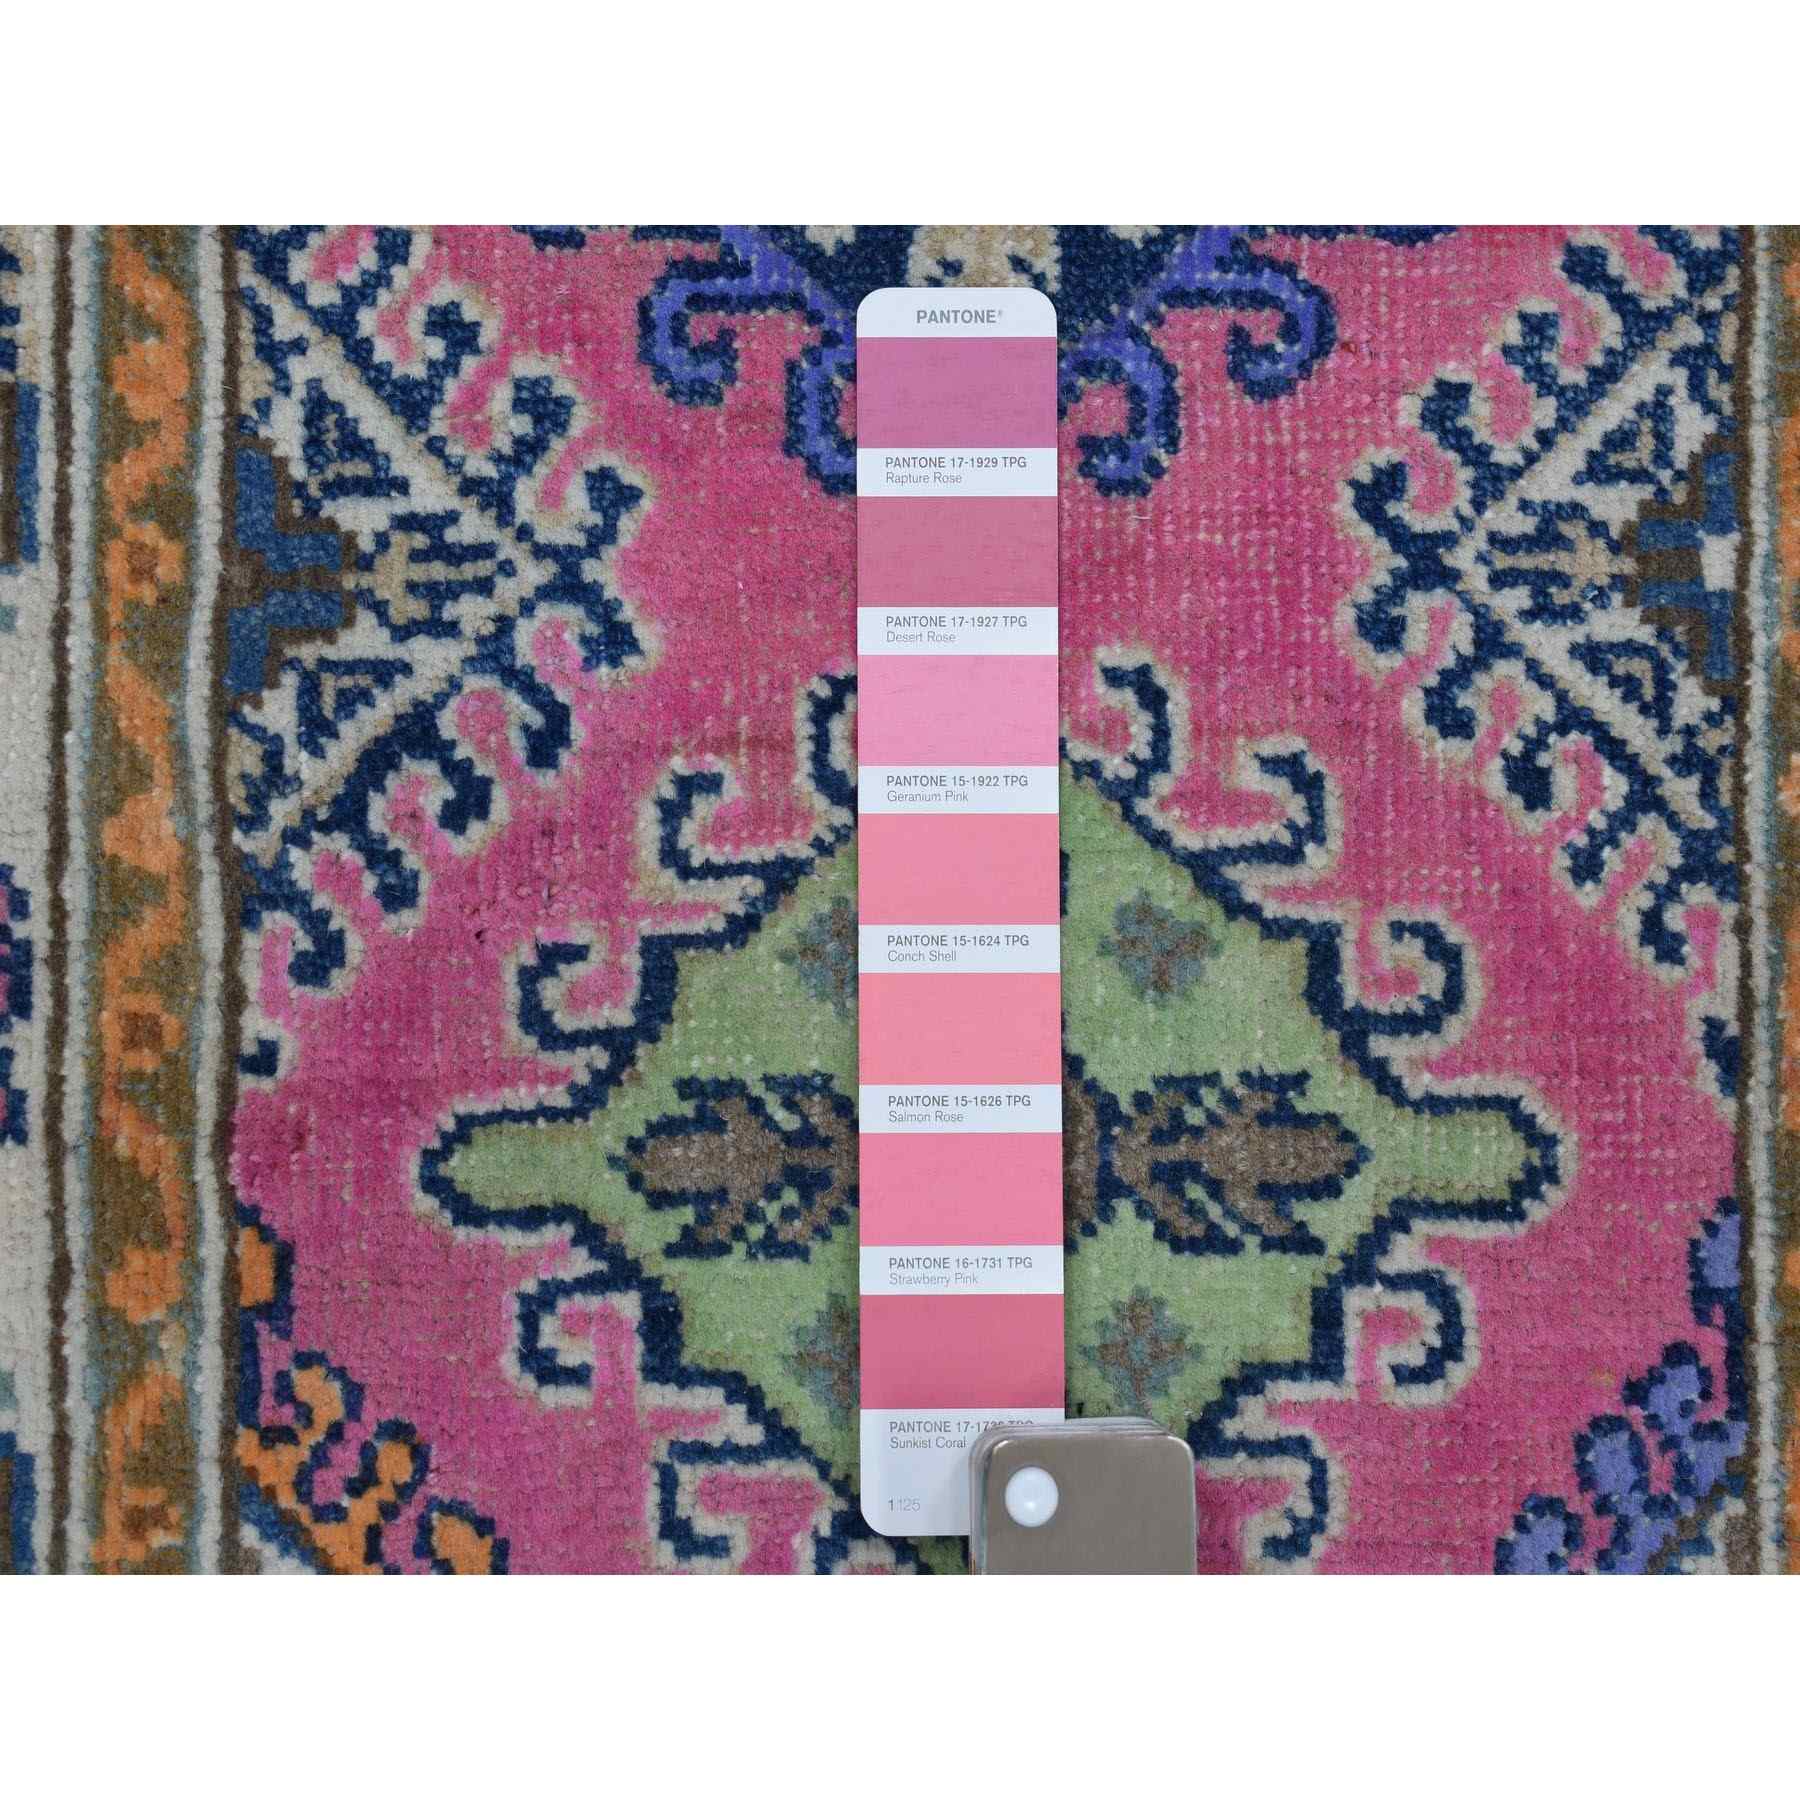 2-x6-4  Colorful Pink Fusion Kazak Pure Wool Geometric Design Runner Hand Knotted Oriental Rug 